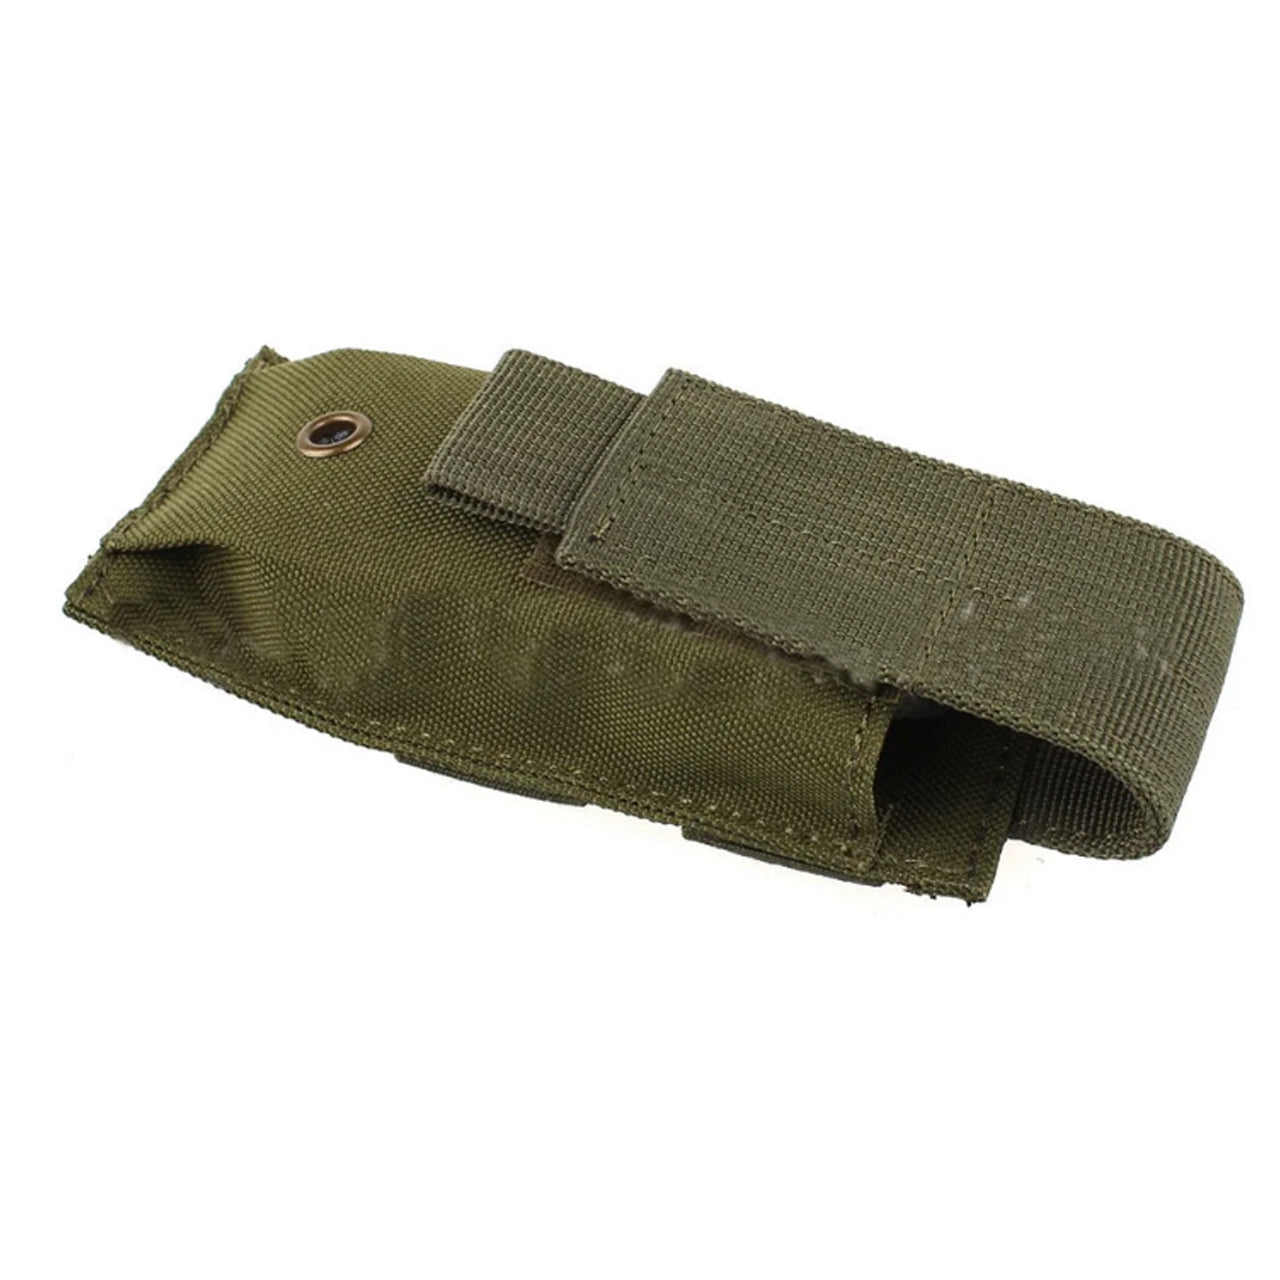 Great little pouch for carrying your multitool or small folding knife in. Can be attached to webbing or backpack strap for quick access. 13x5x2.5cm www.defenceqstore.com.au